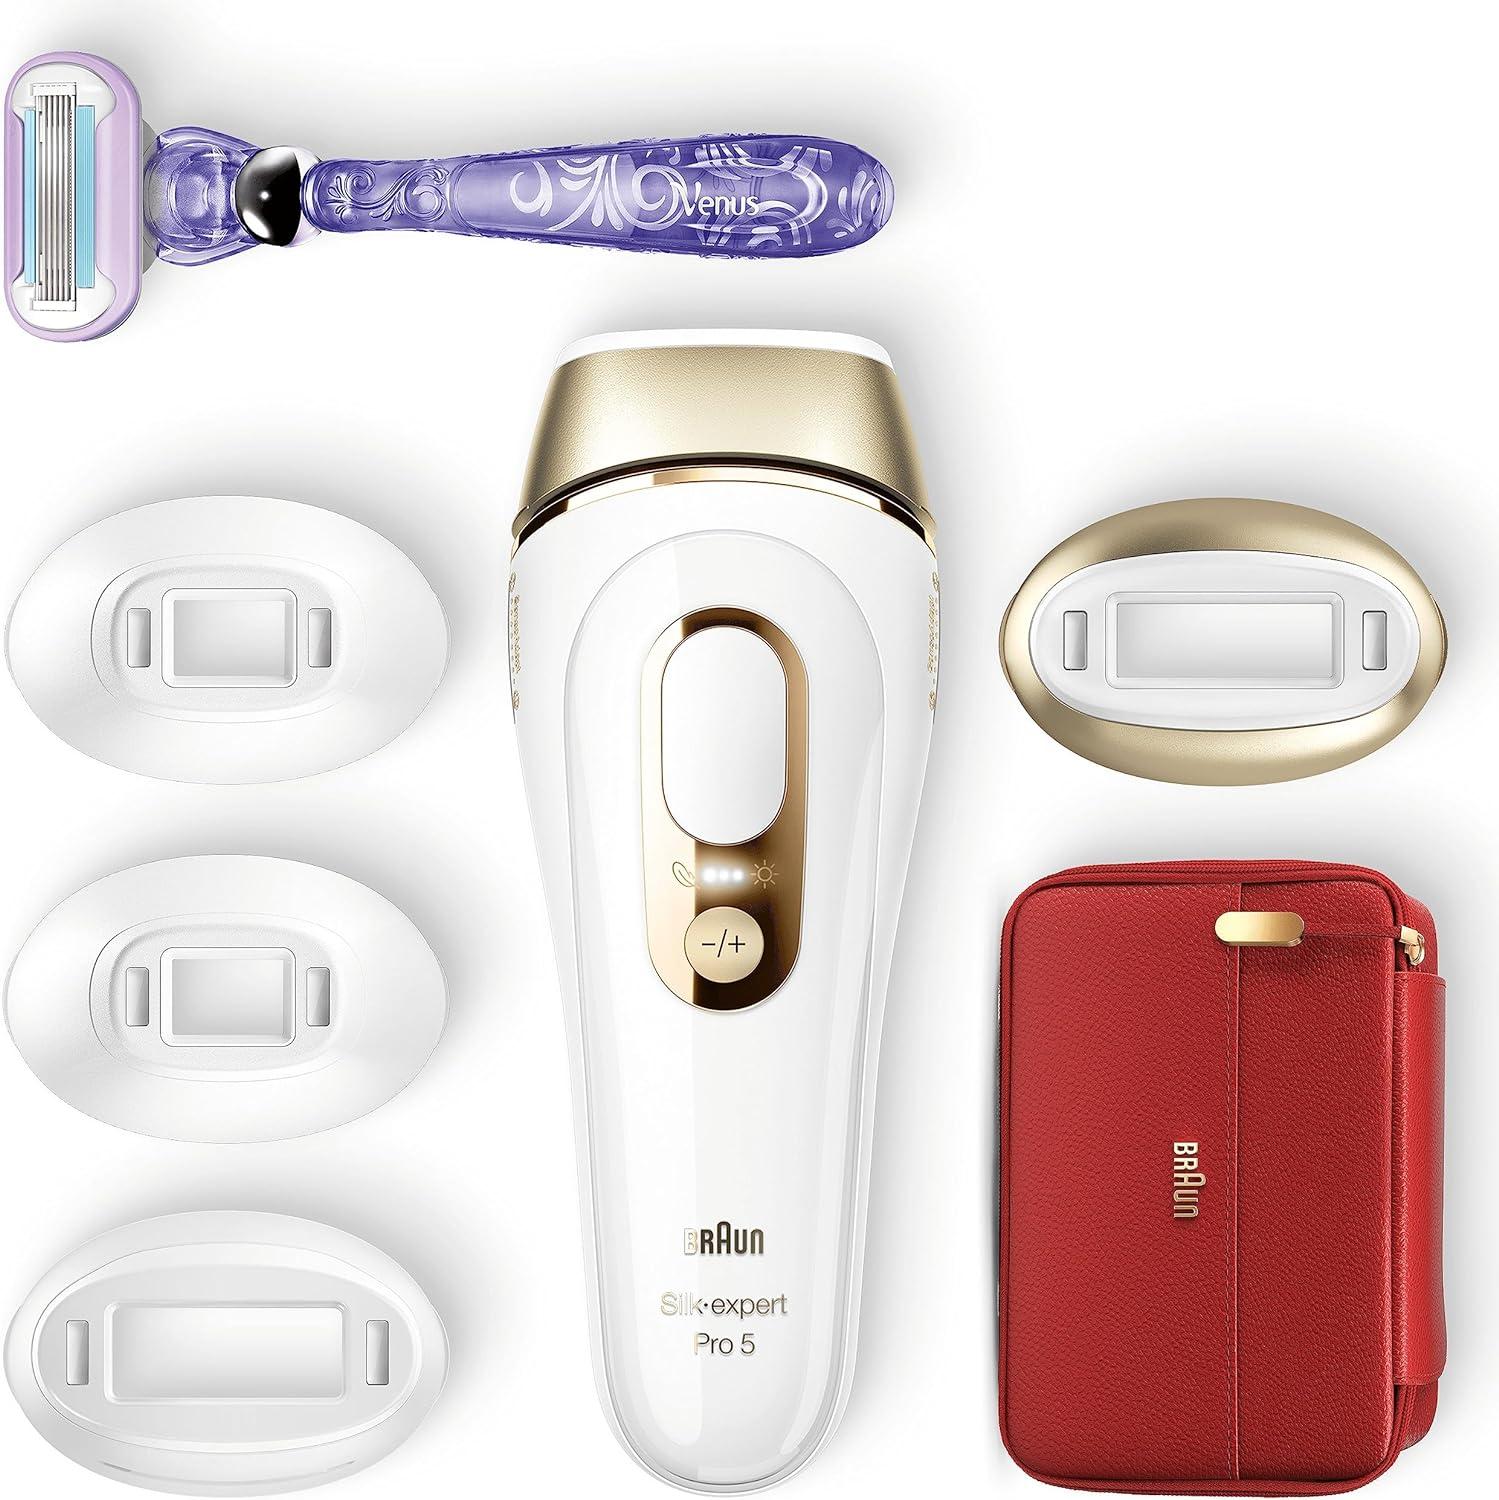 Braun IPL Silk-Expert Pro 5 Visible Hair Removal With Pouch 1 Wide